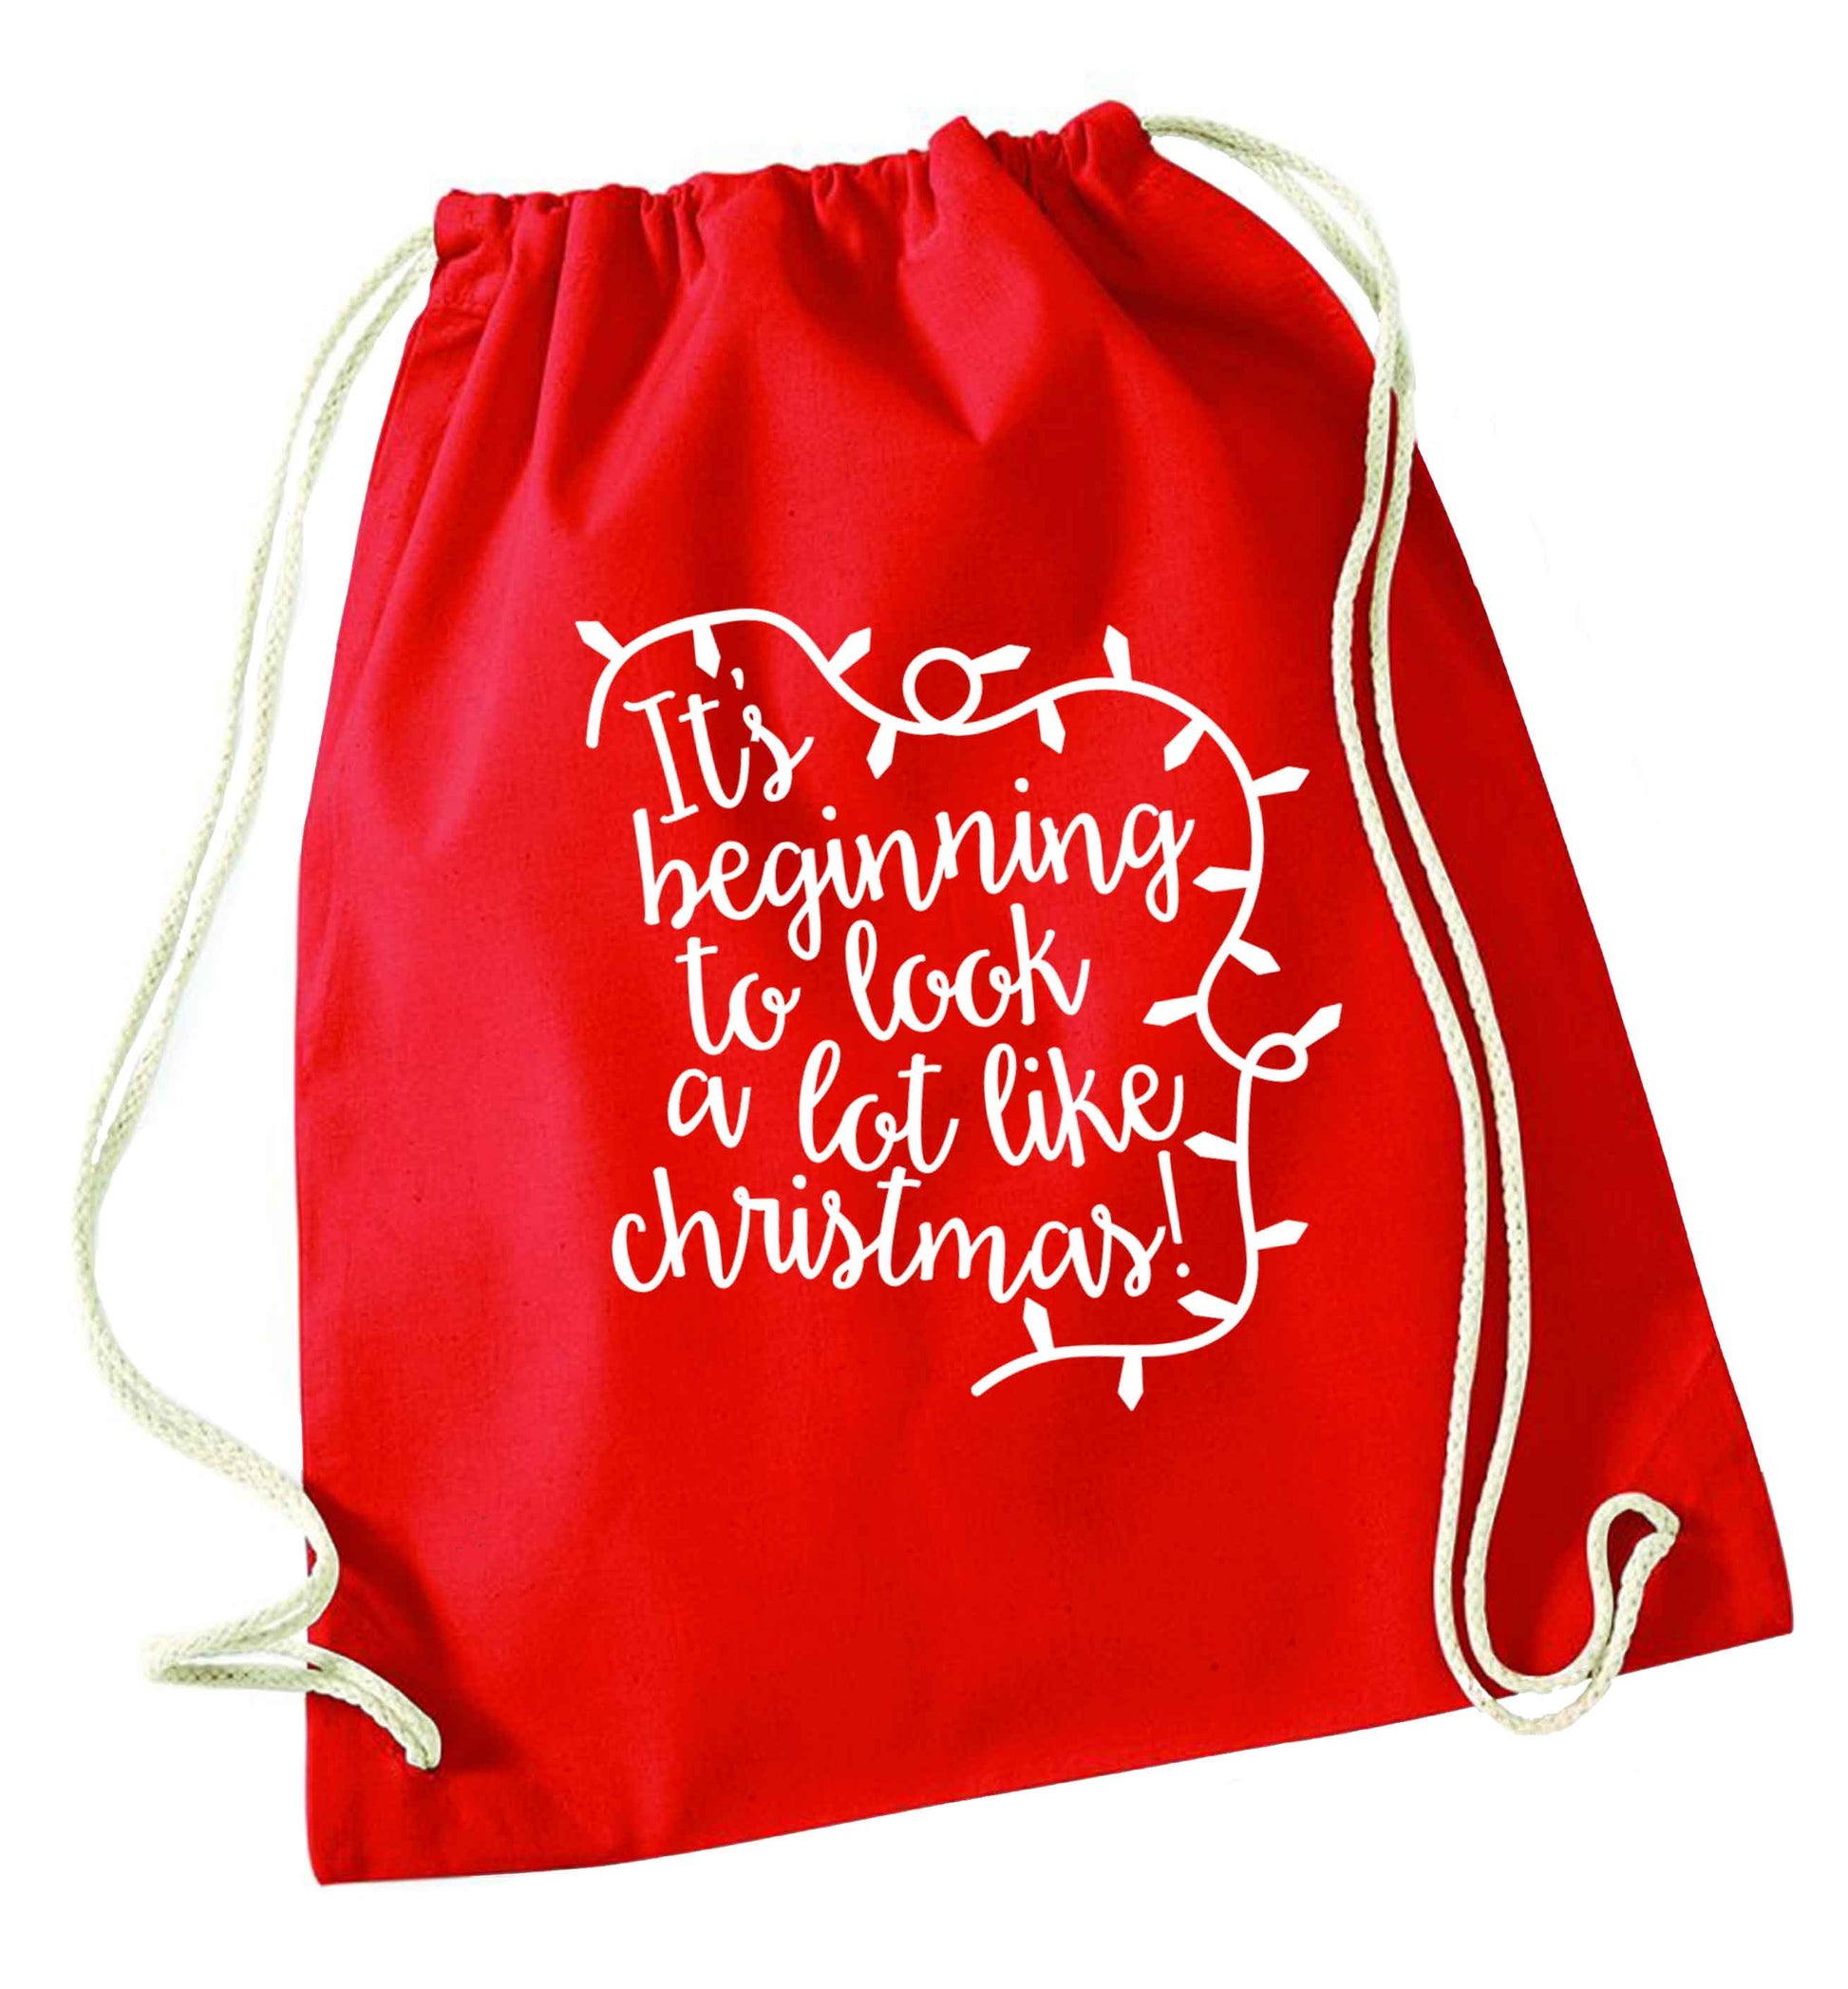 It's beginning to look a lot like Christmas red drawstring bag 